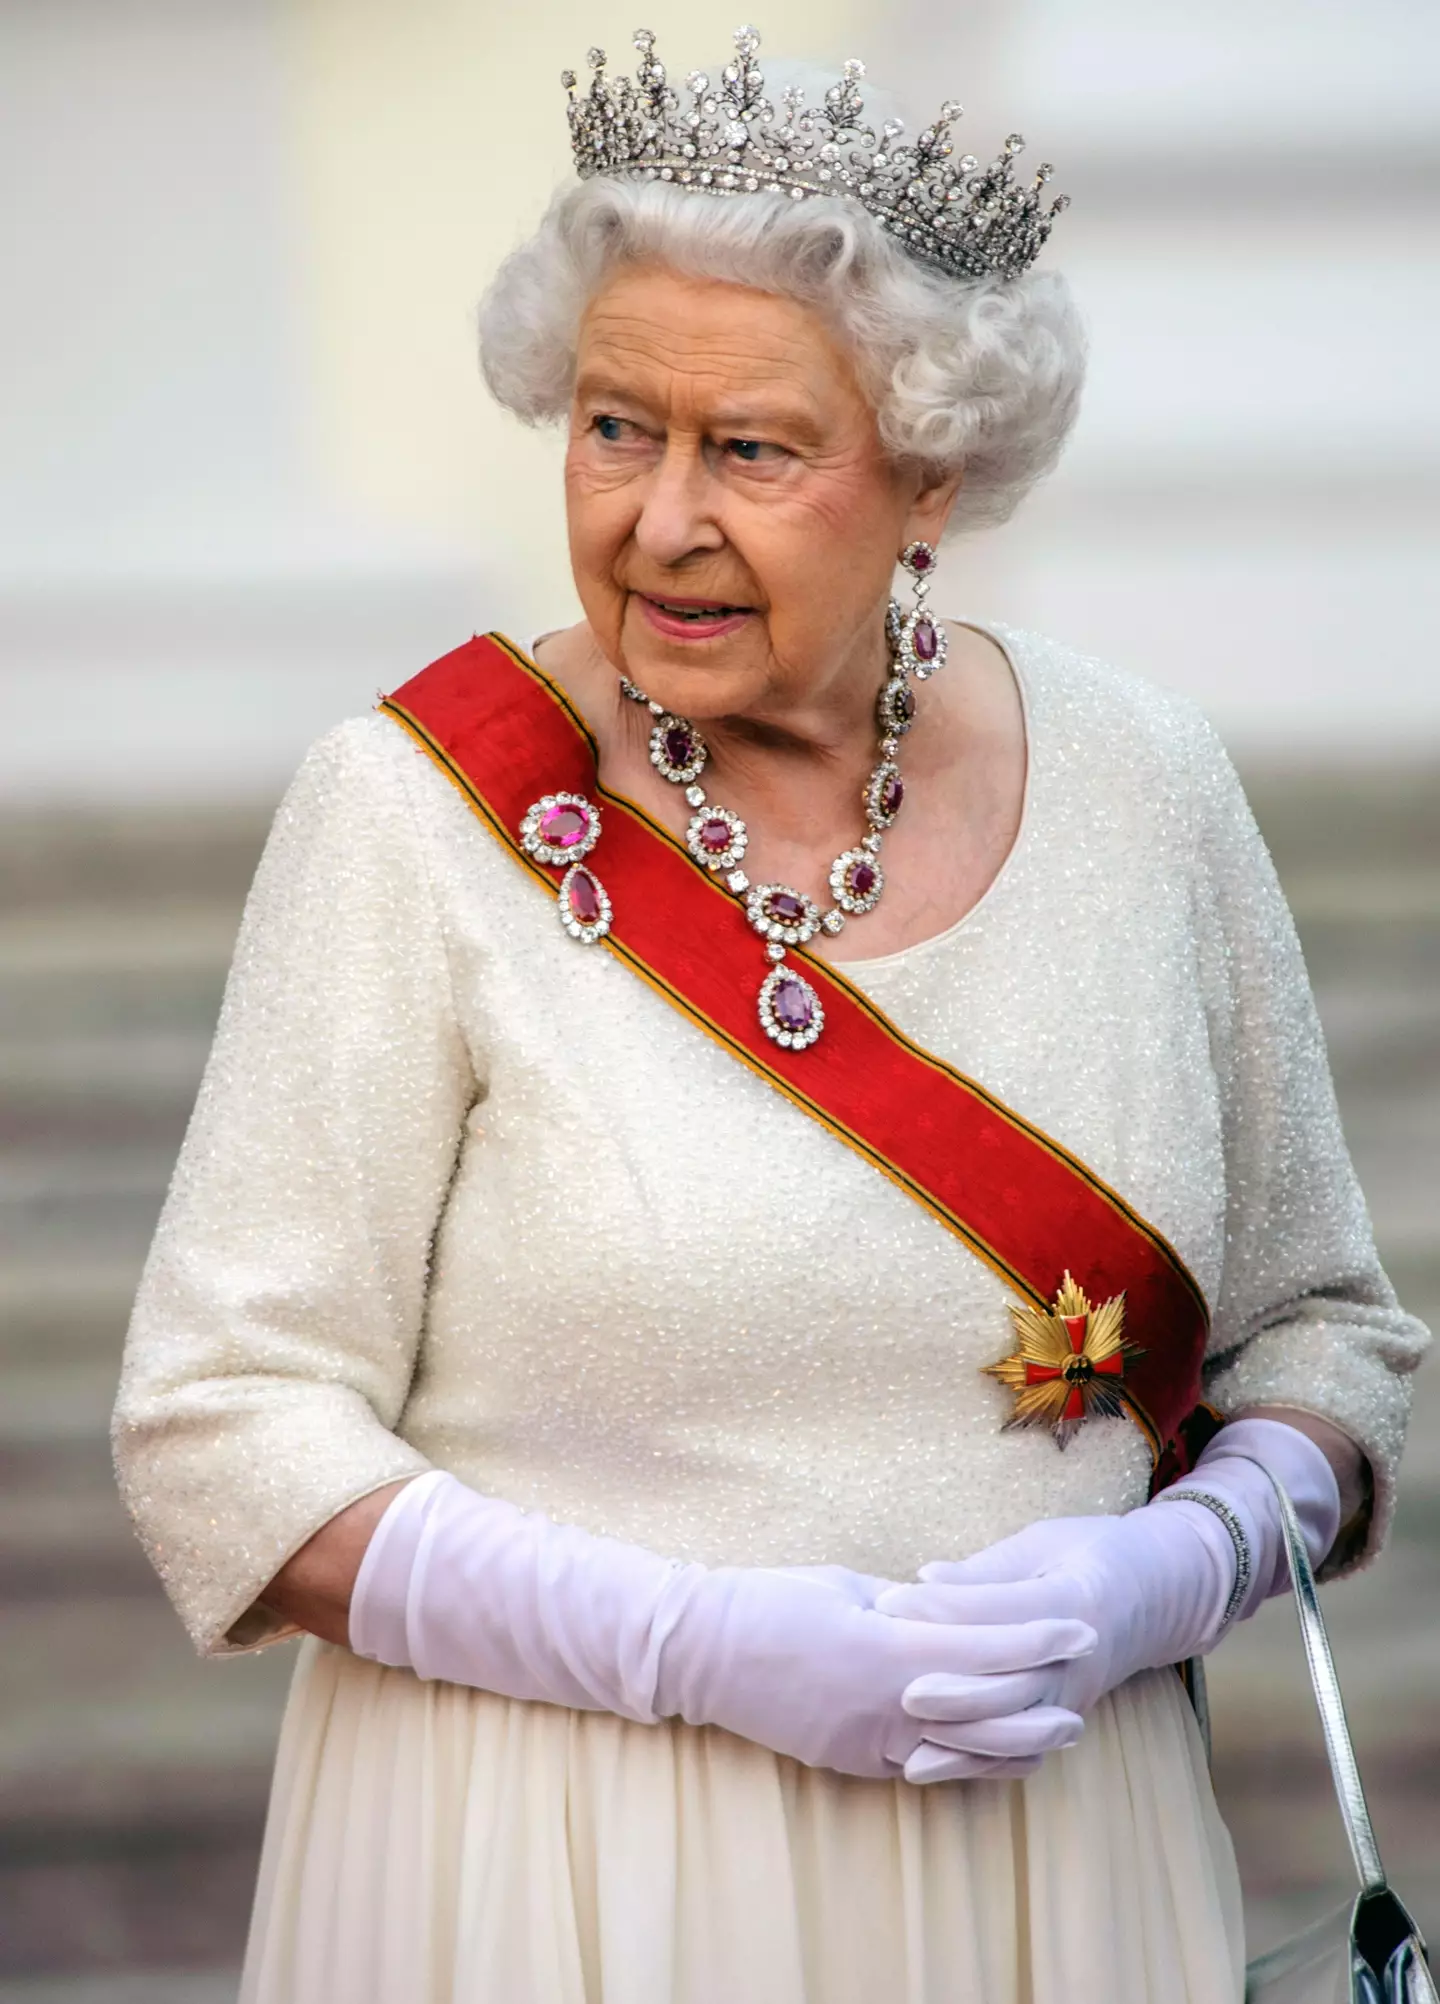 The Queen died yesterday afternoon at Balmoral.